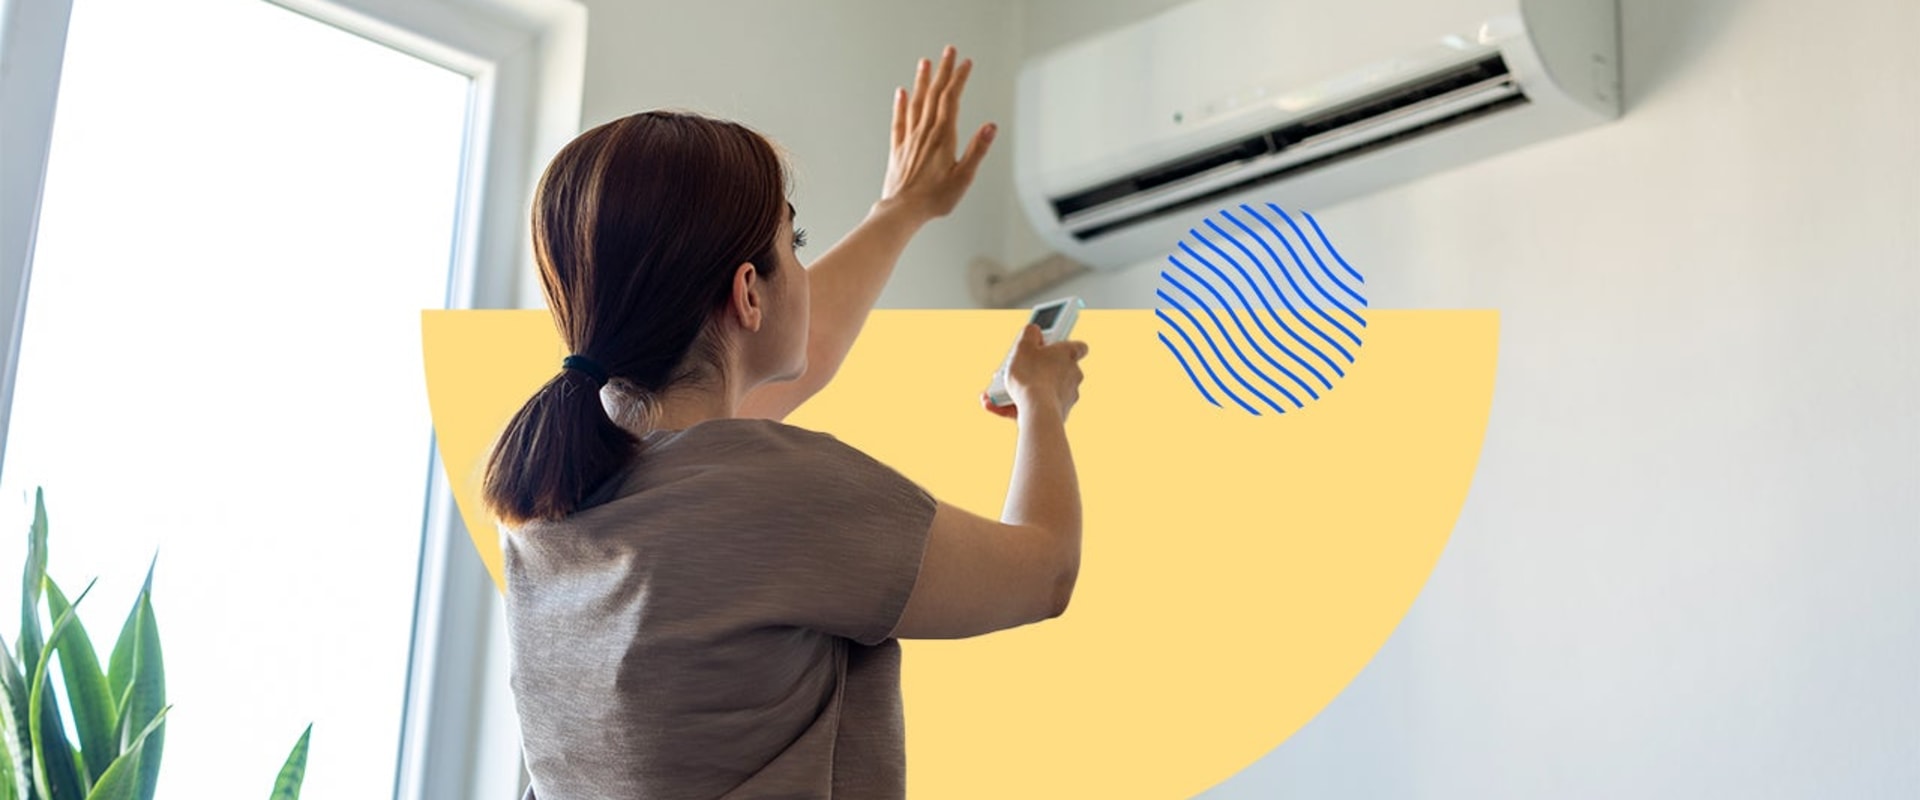 How to Save Money on an AC Tune-Up Service Without Compromising Quality